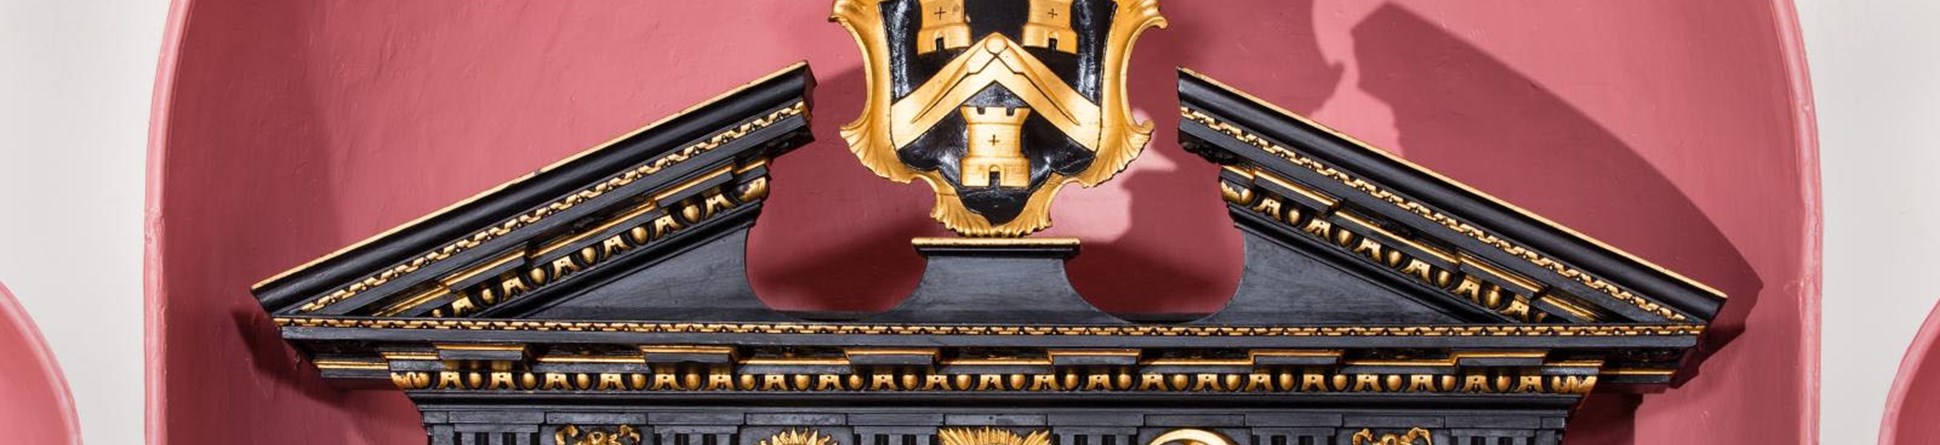 Coat of arms on top of a throne with masonic symbols underneath. Wood is black with gold leaf decoration.